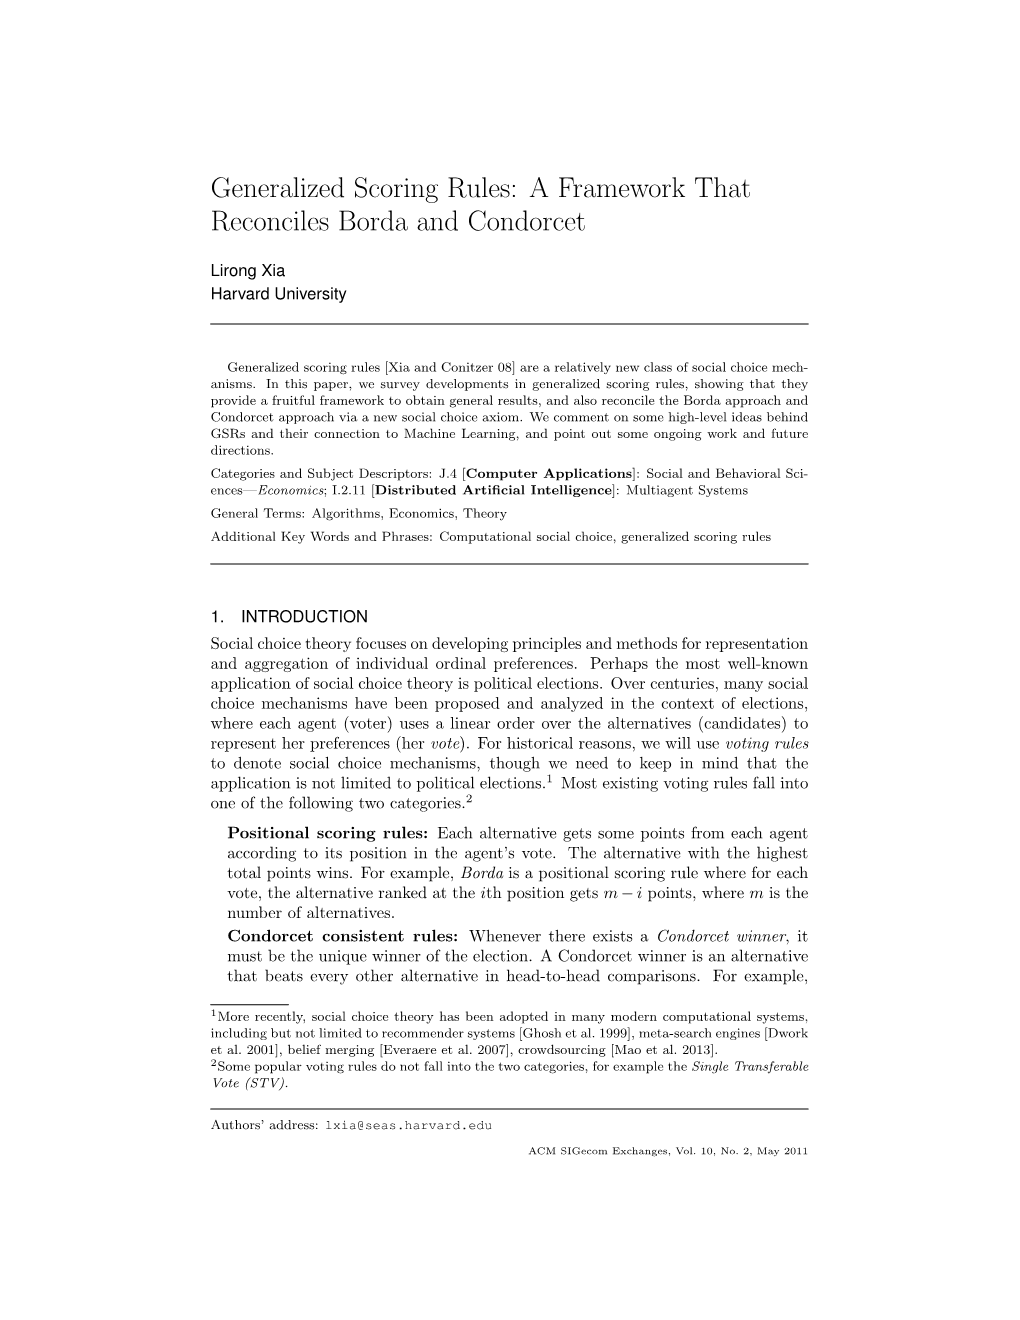 Generalized Scoring Rules: a Framework That Reconciles Borda and Condorcet